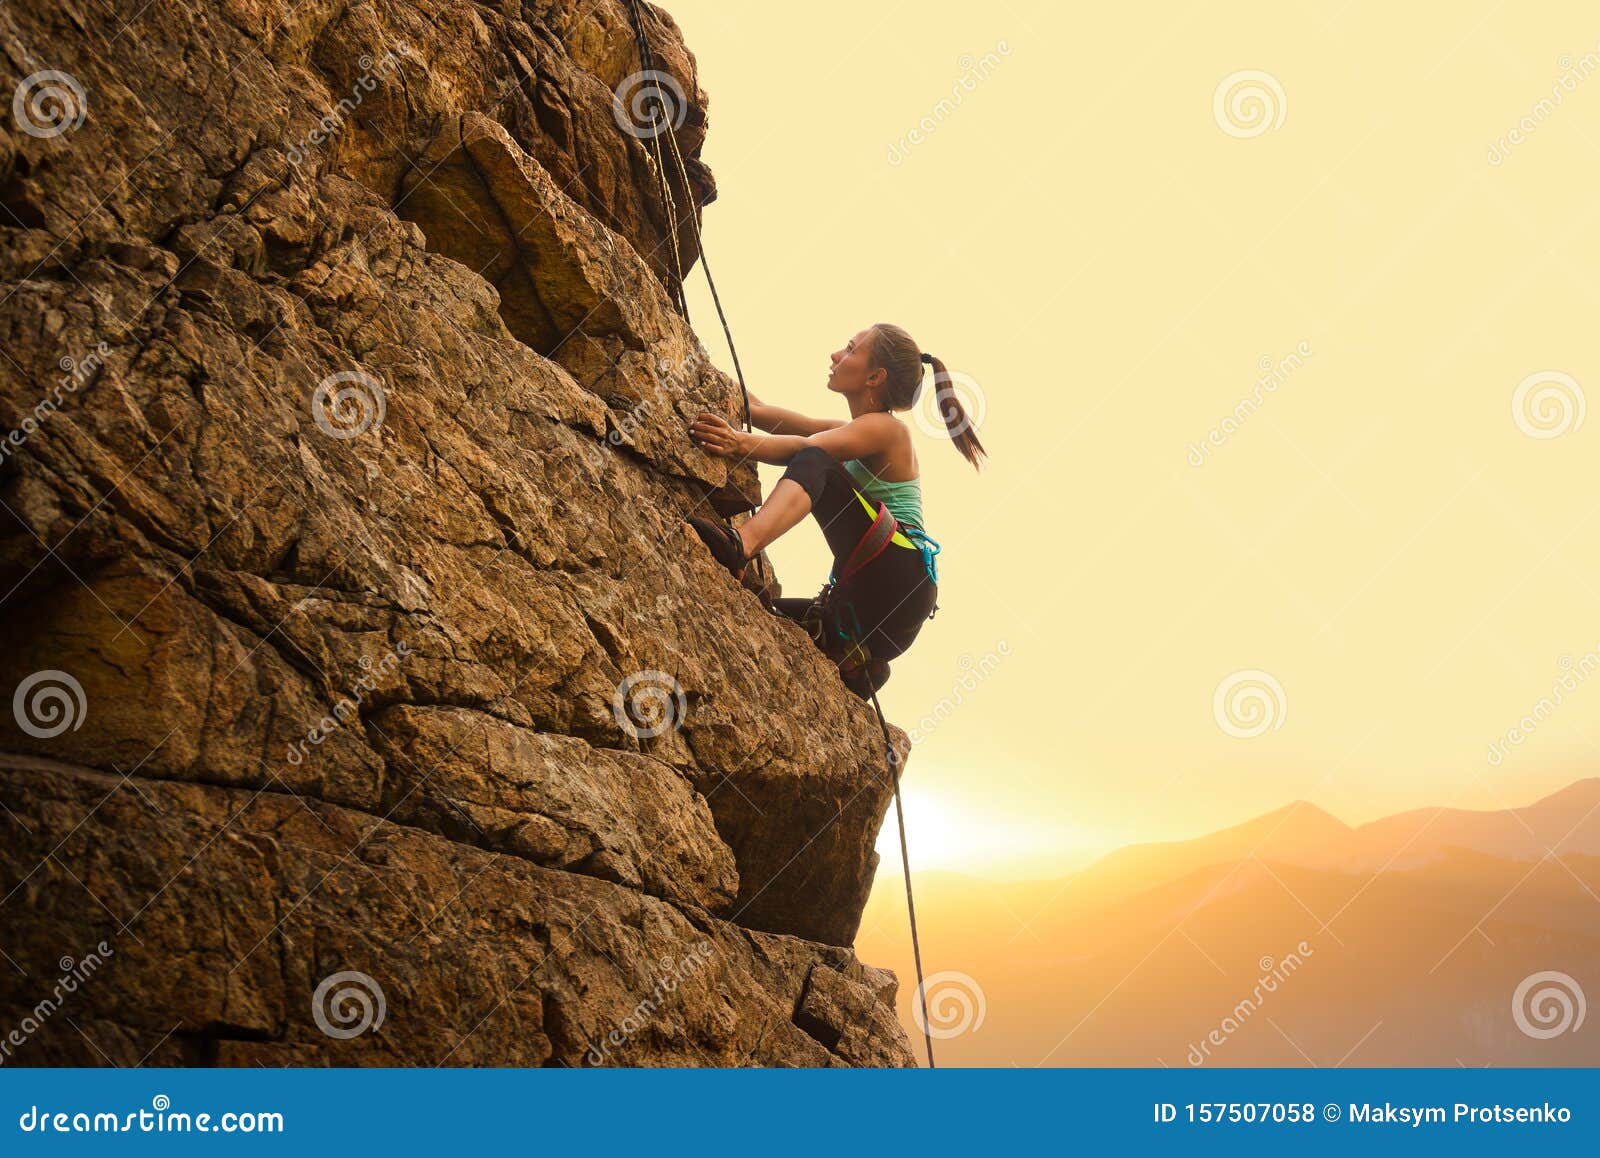 beautiful woman climbing on the rock at foggy sunset in the mountains. adventure and extreme sport concept